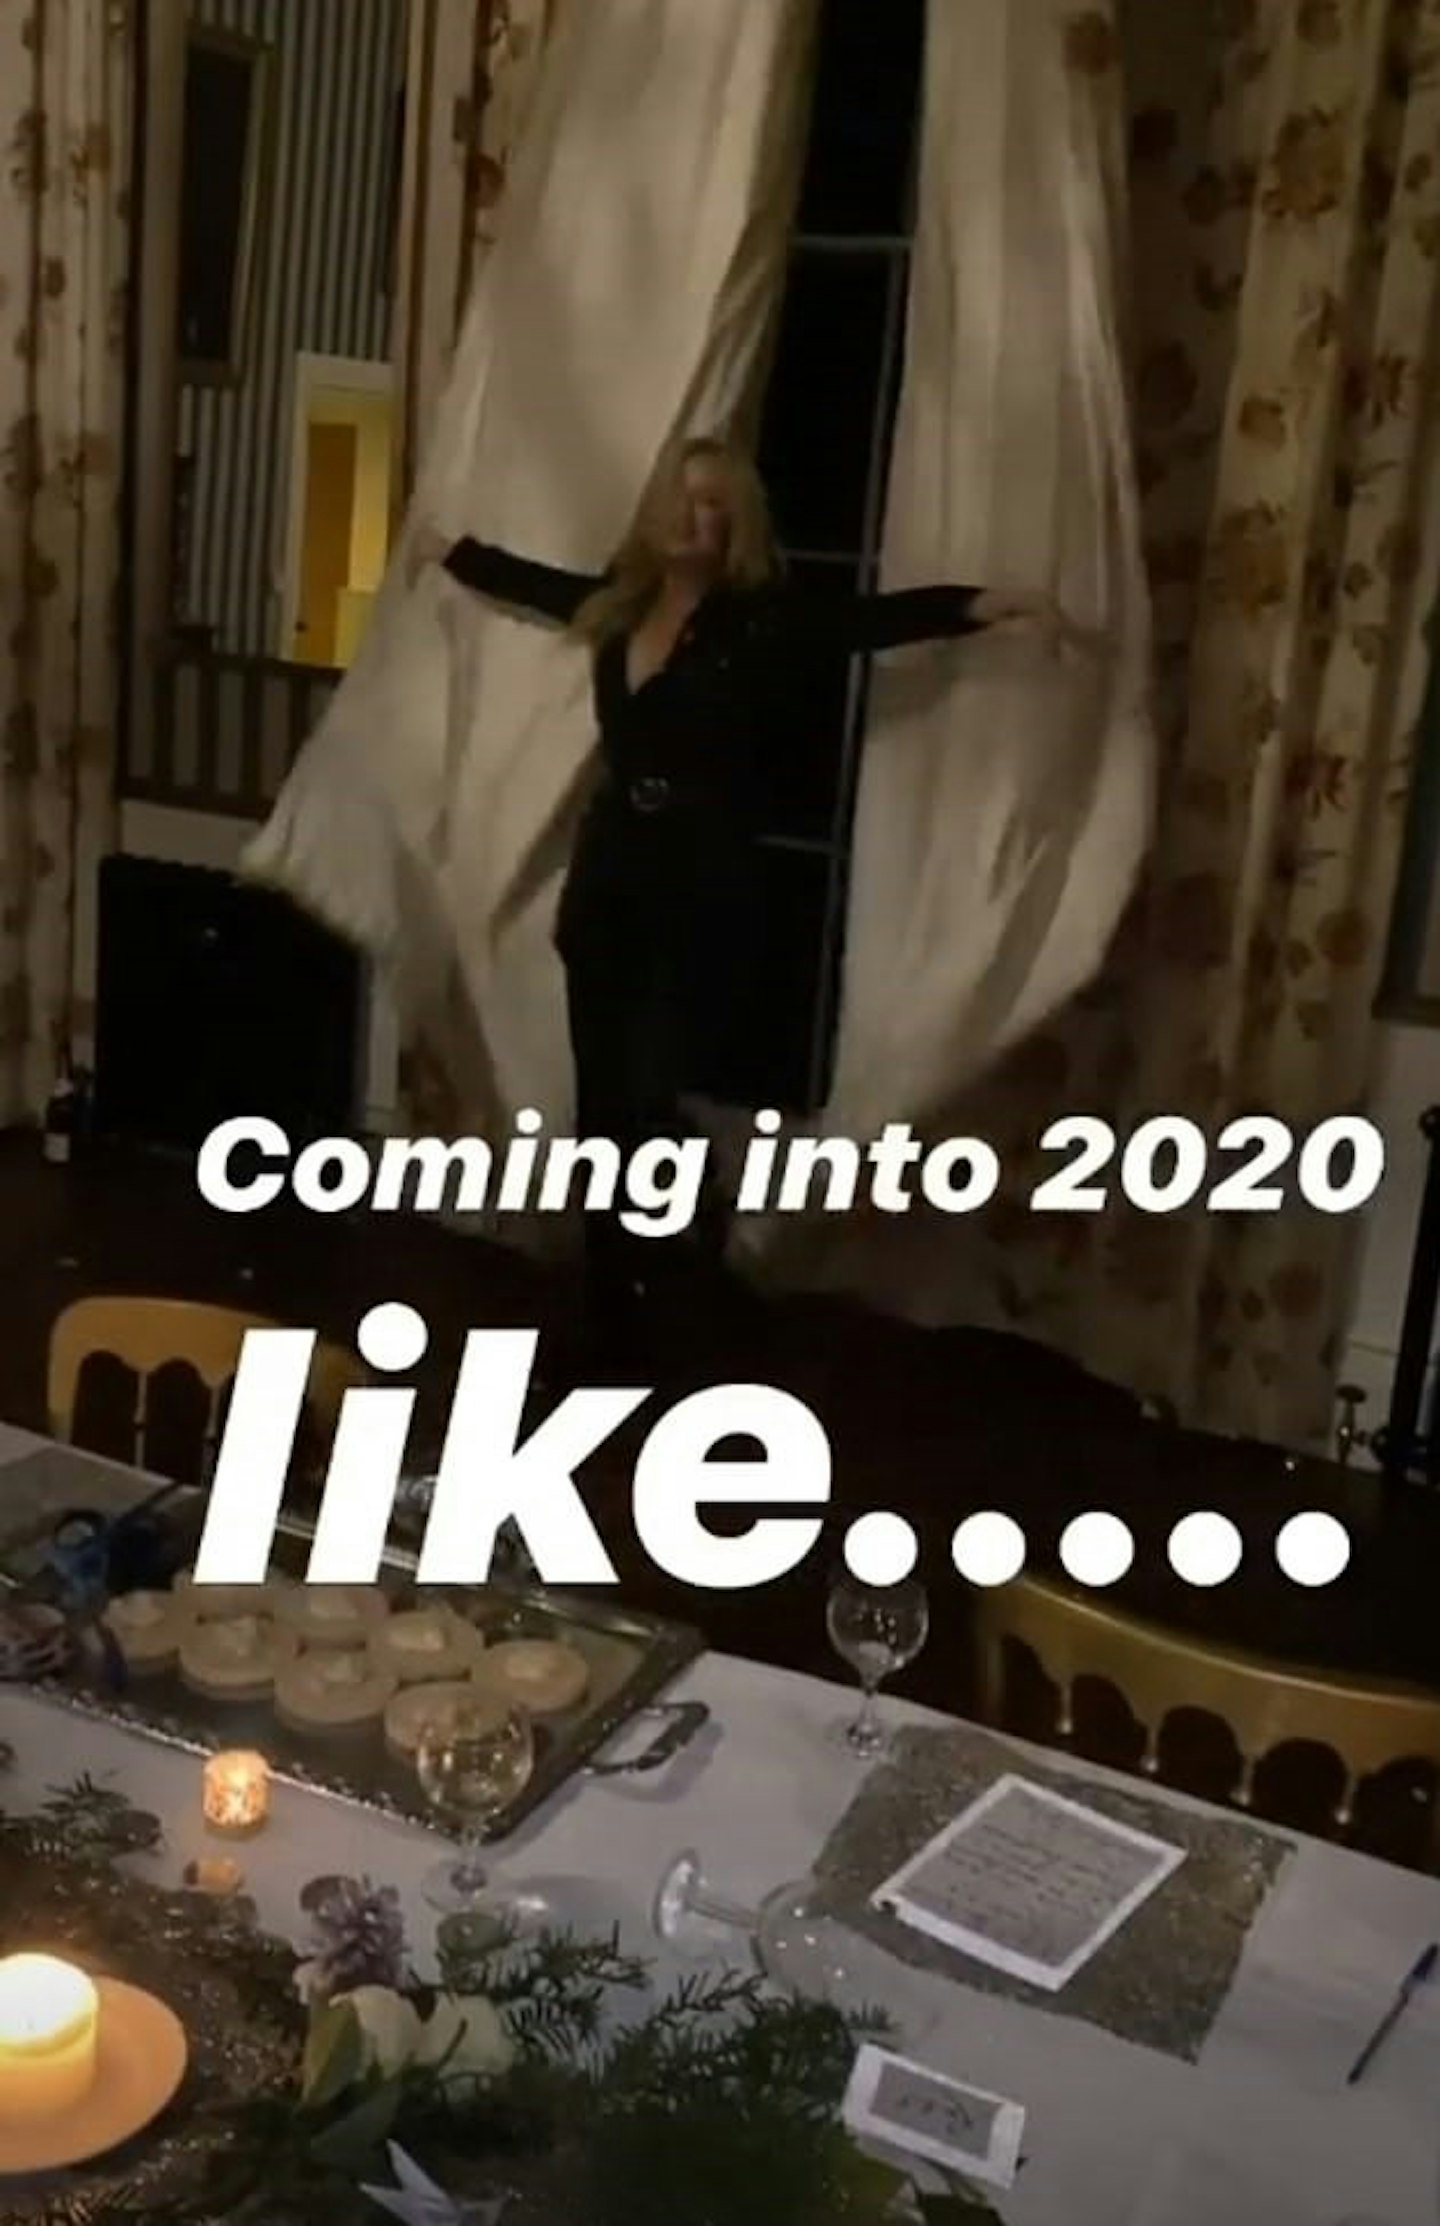 Laura Whitmore hides behind curtains